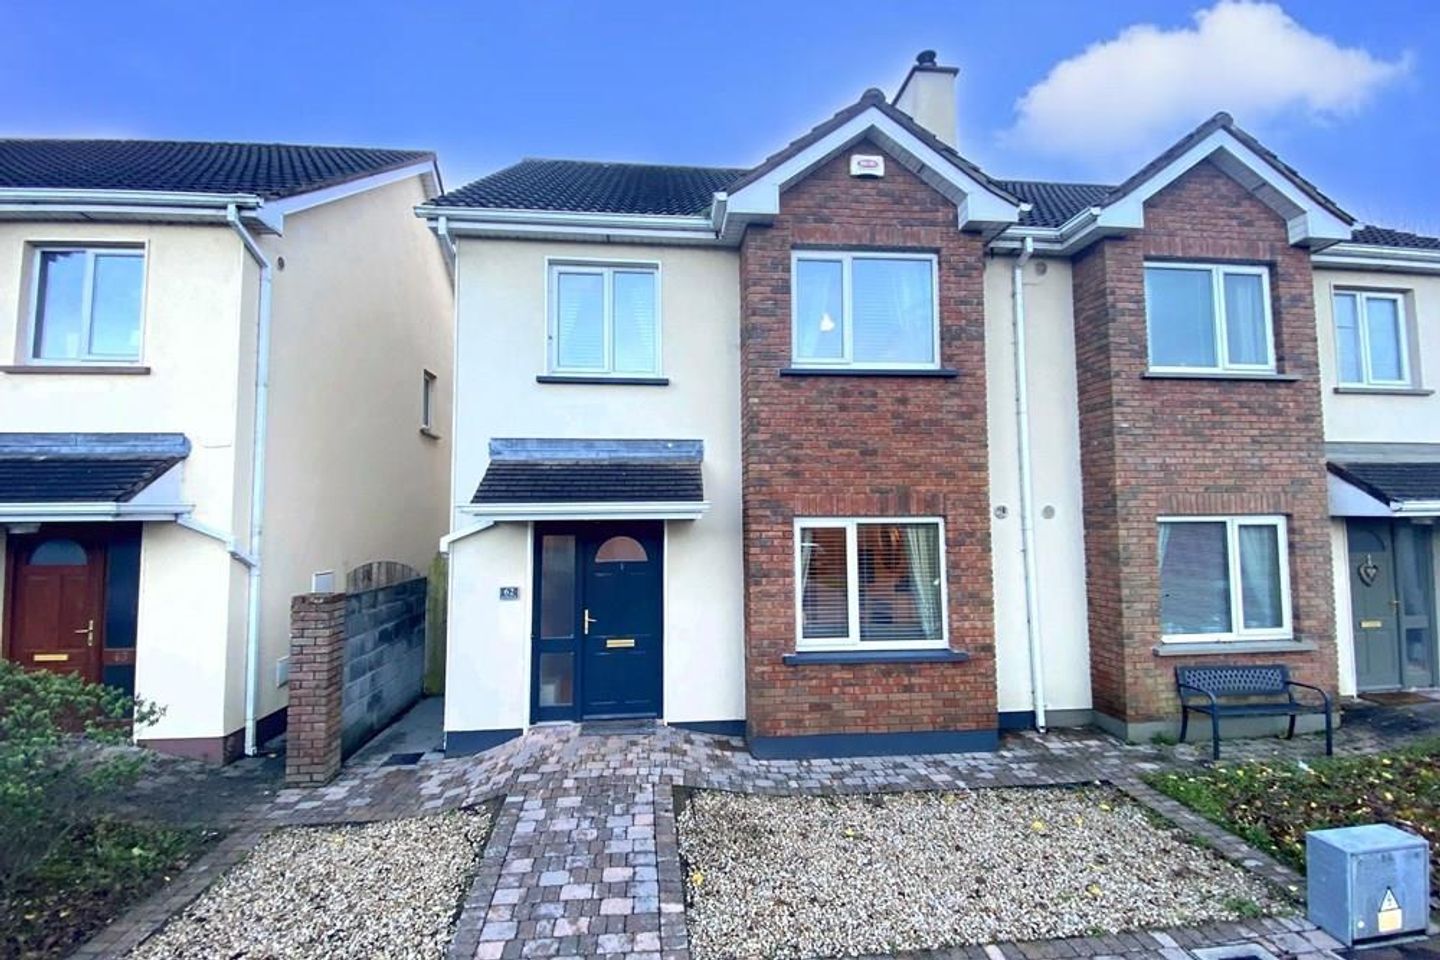 62 An Mhainistir, Lakeview, Claregalway, Co. Galway, H91ED7H